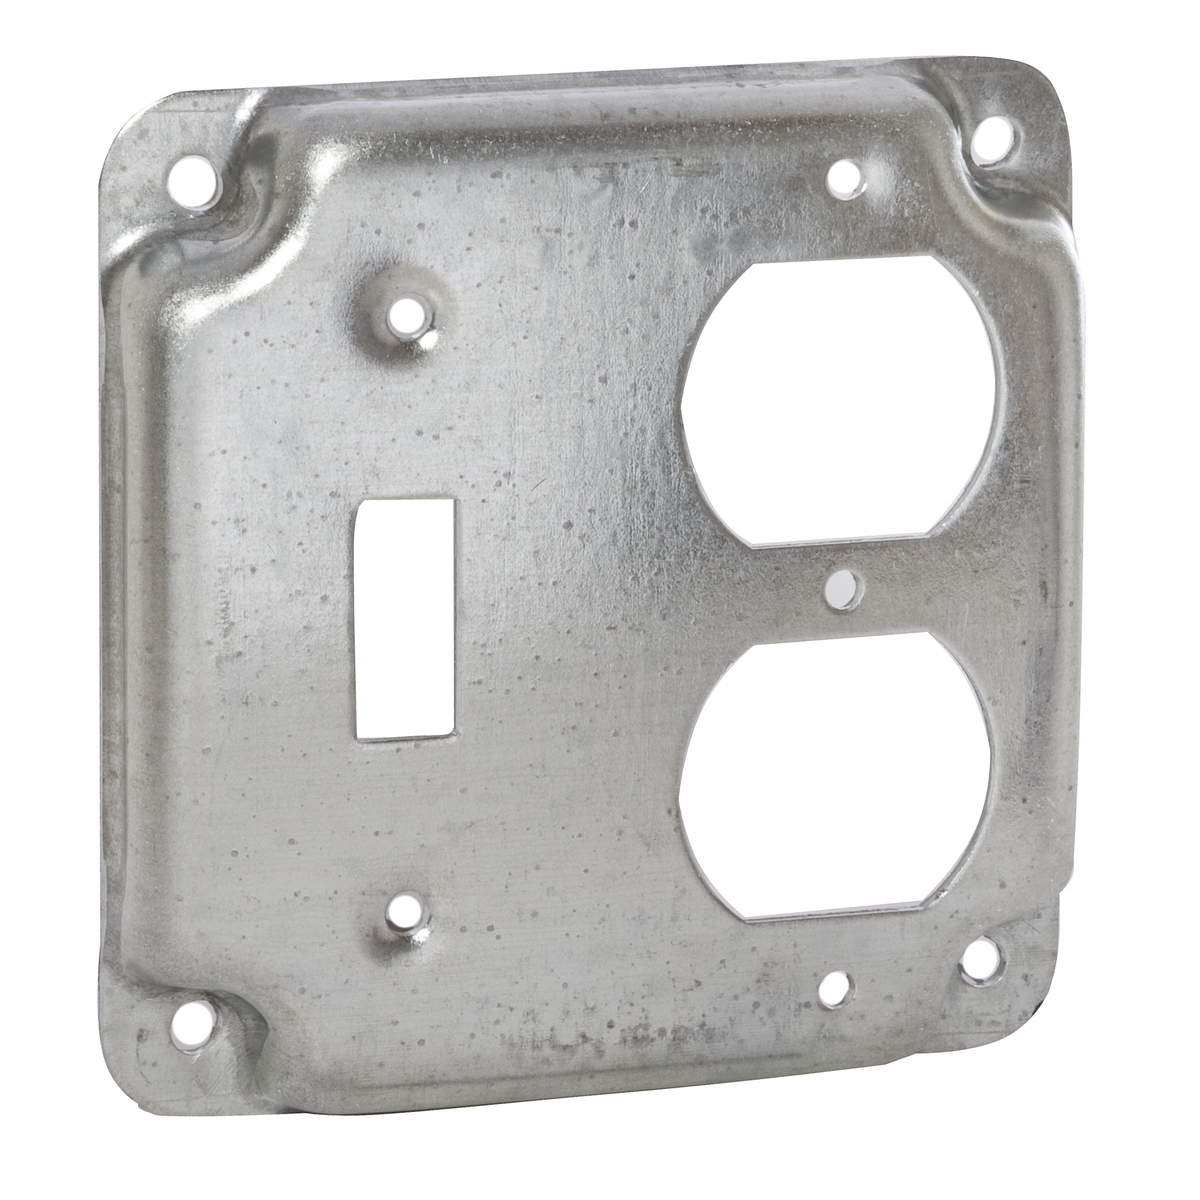 4 In. Square Exposed Work Covers - Raised 1/2 In., 1 Duplex Receptacleand 1 Toggle Switch